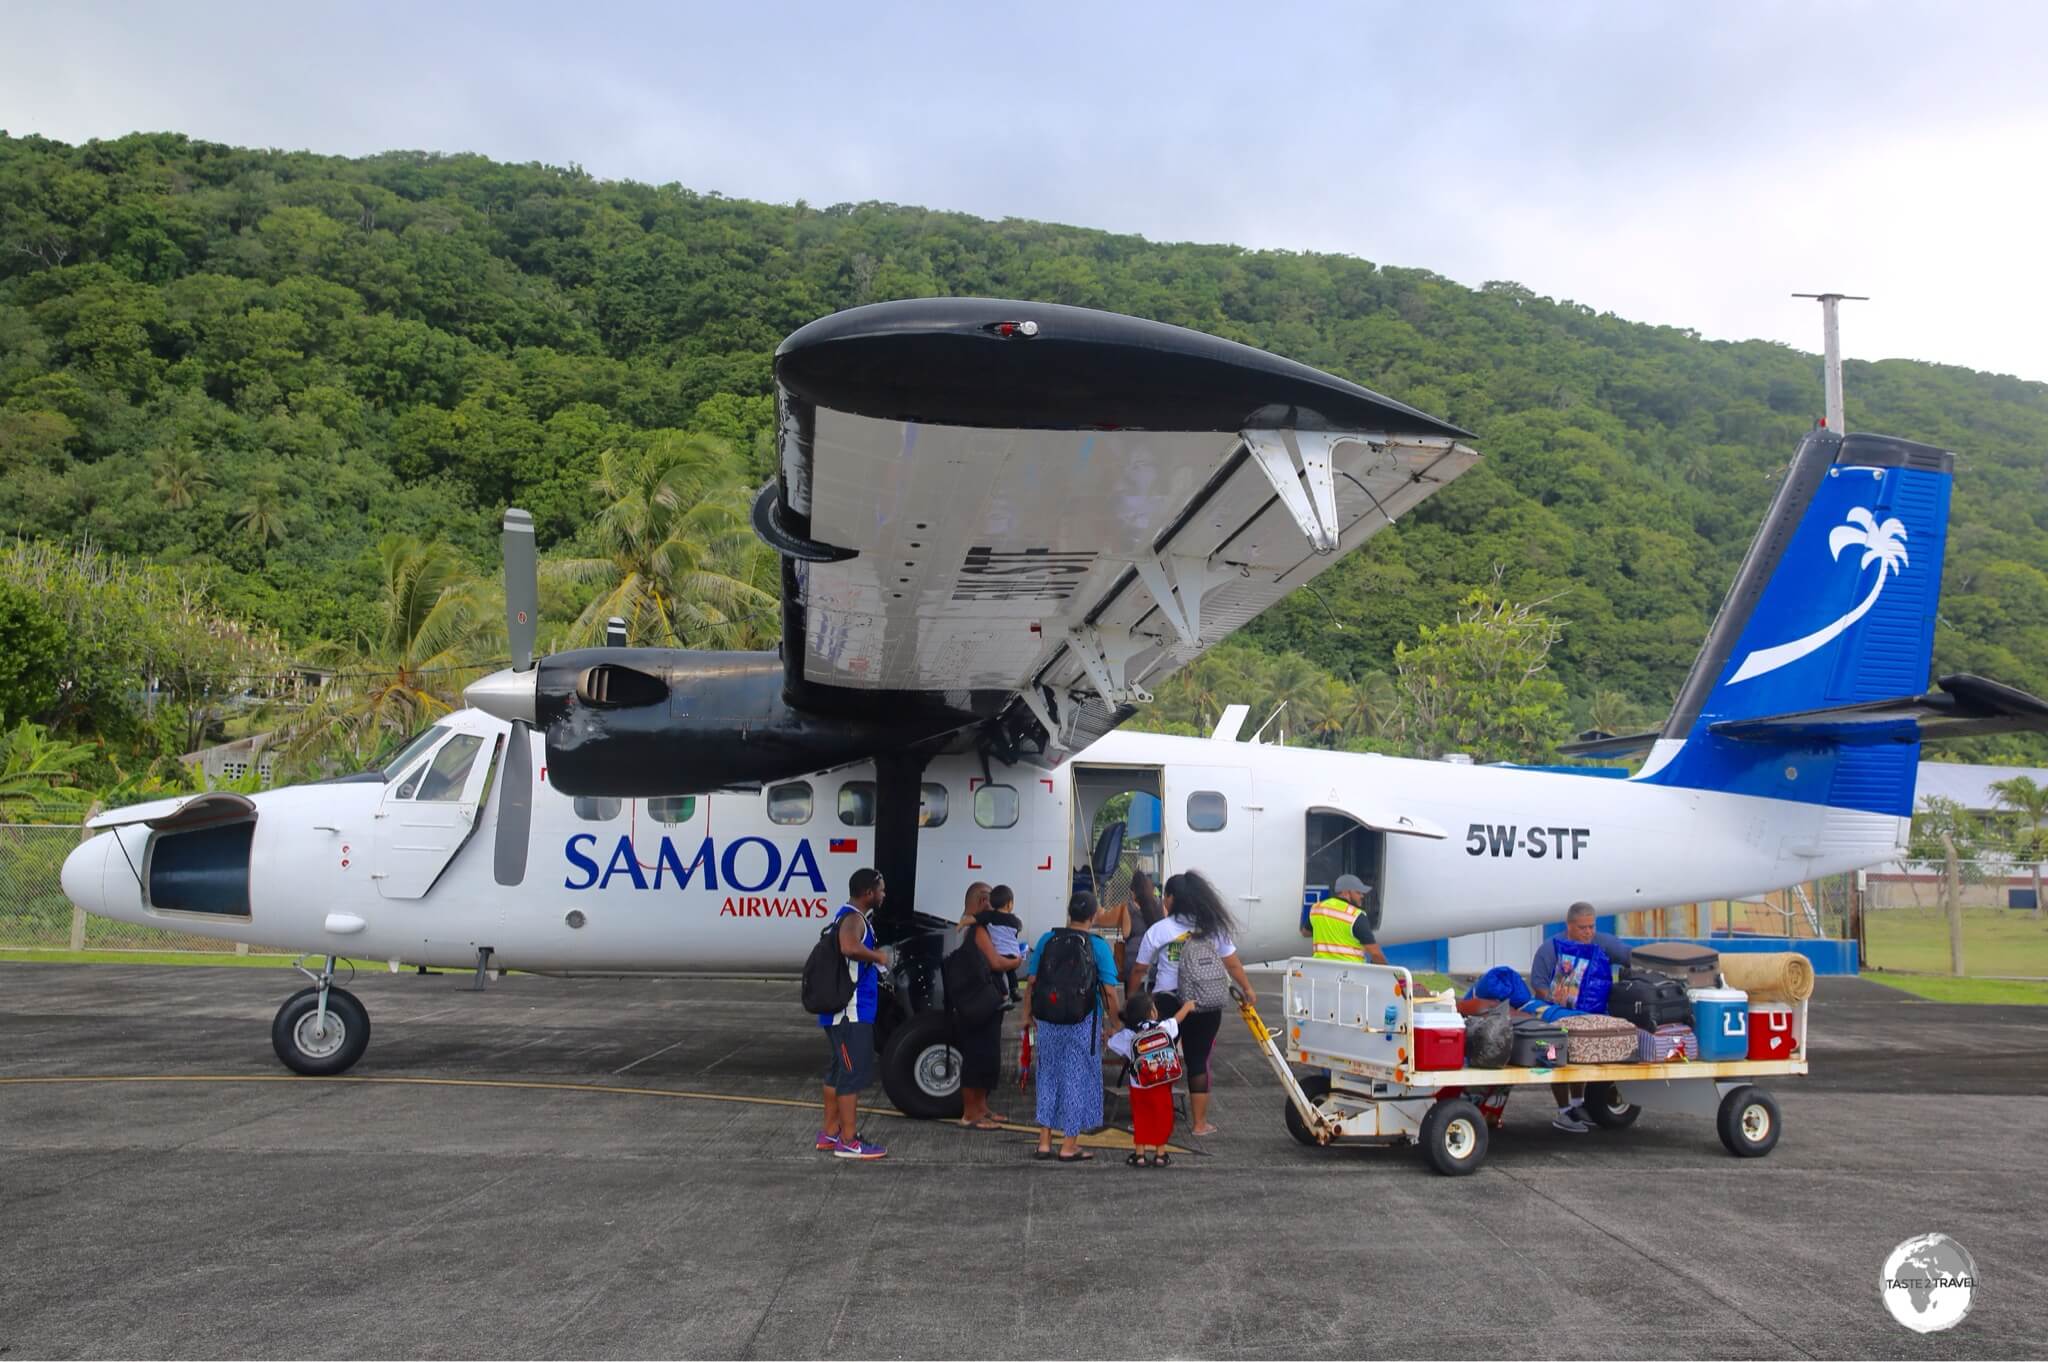 Departing the island of Ta'u for the 30 minute hop to Tutuila with Samoa Airways.